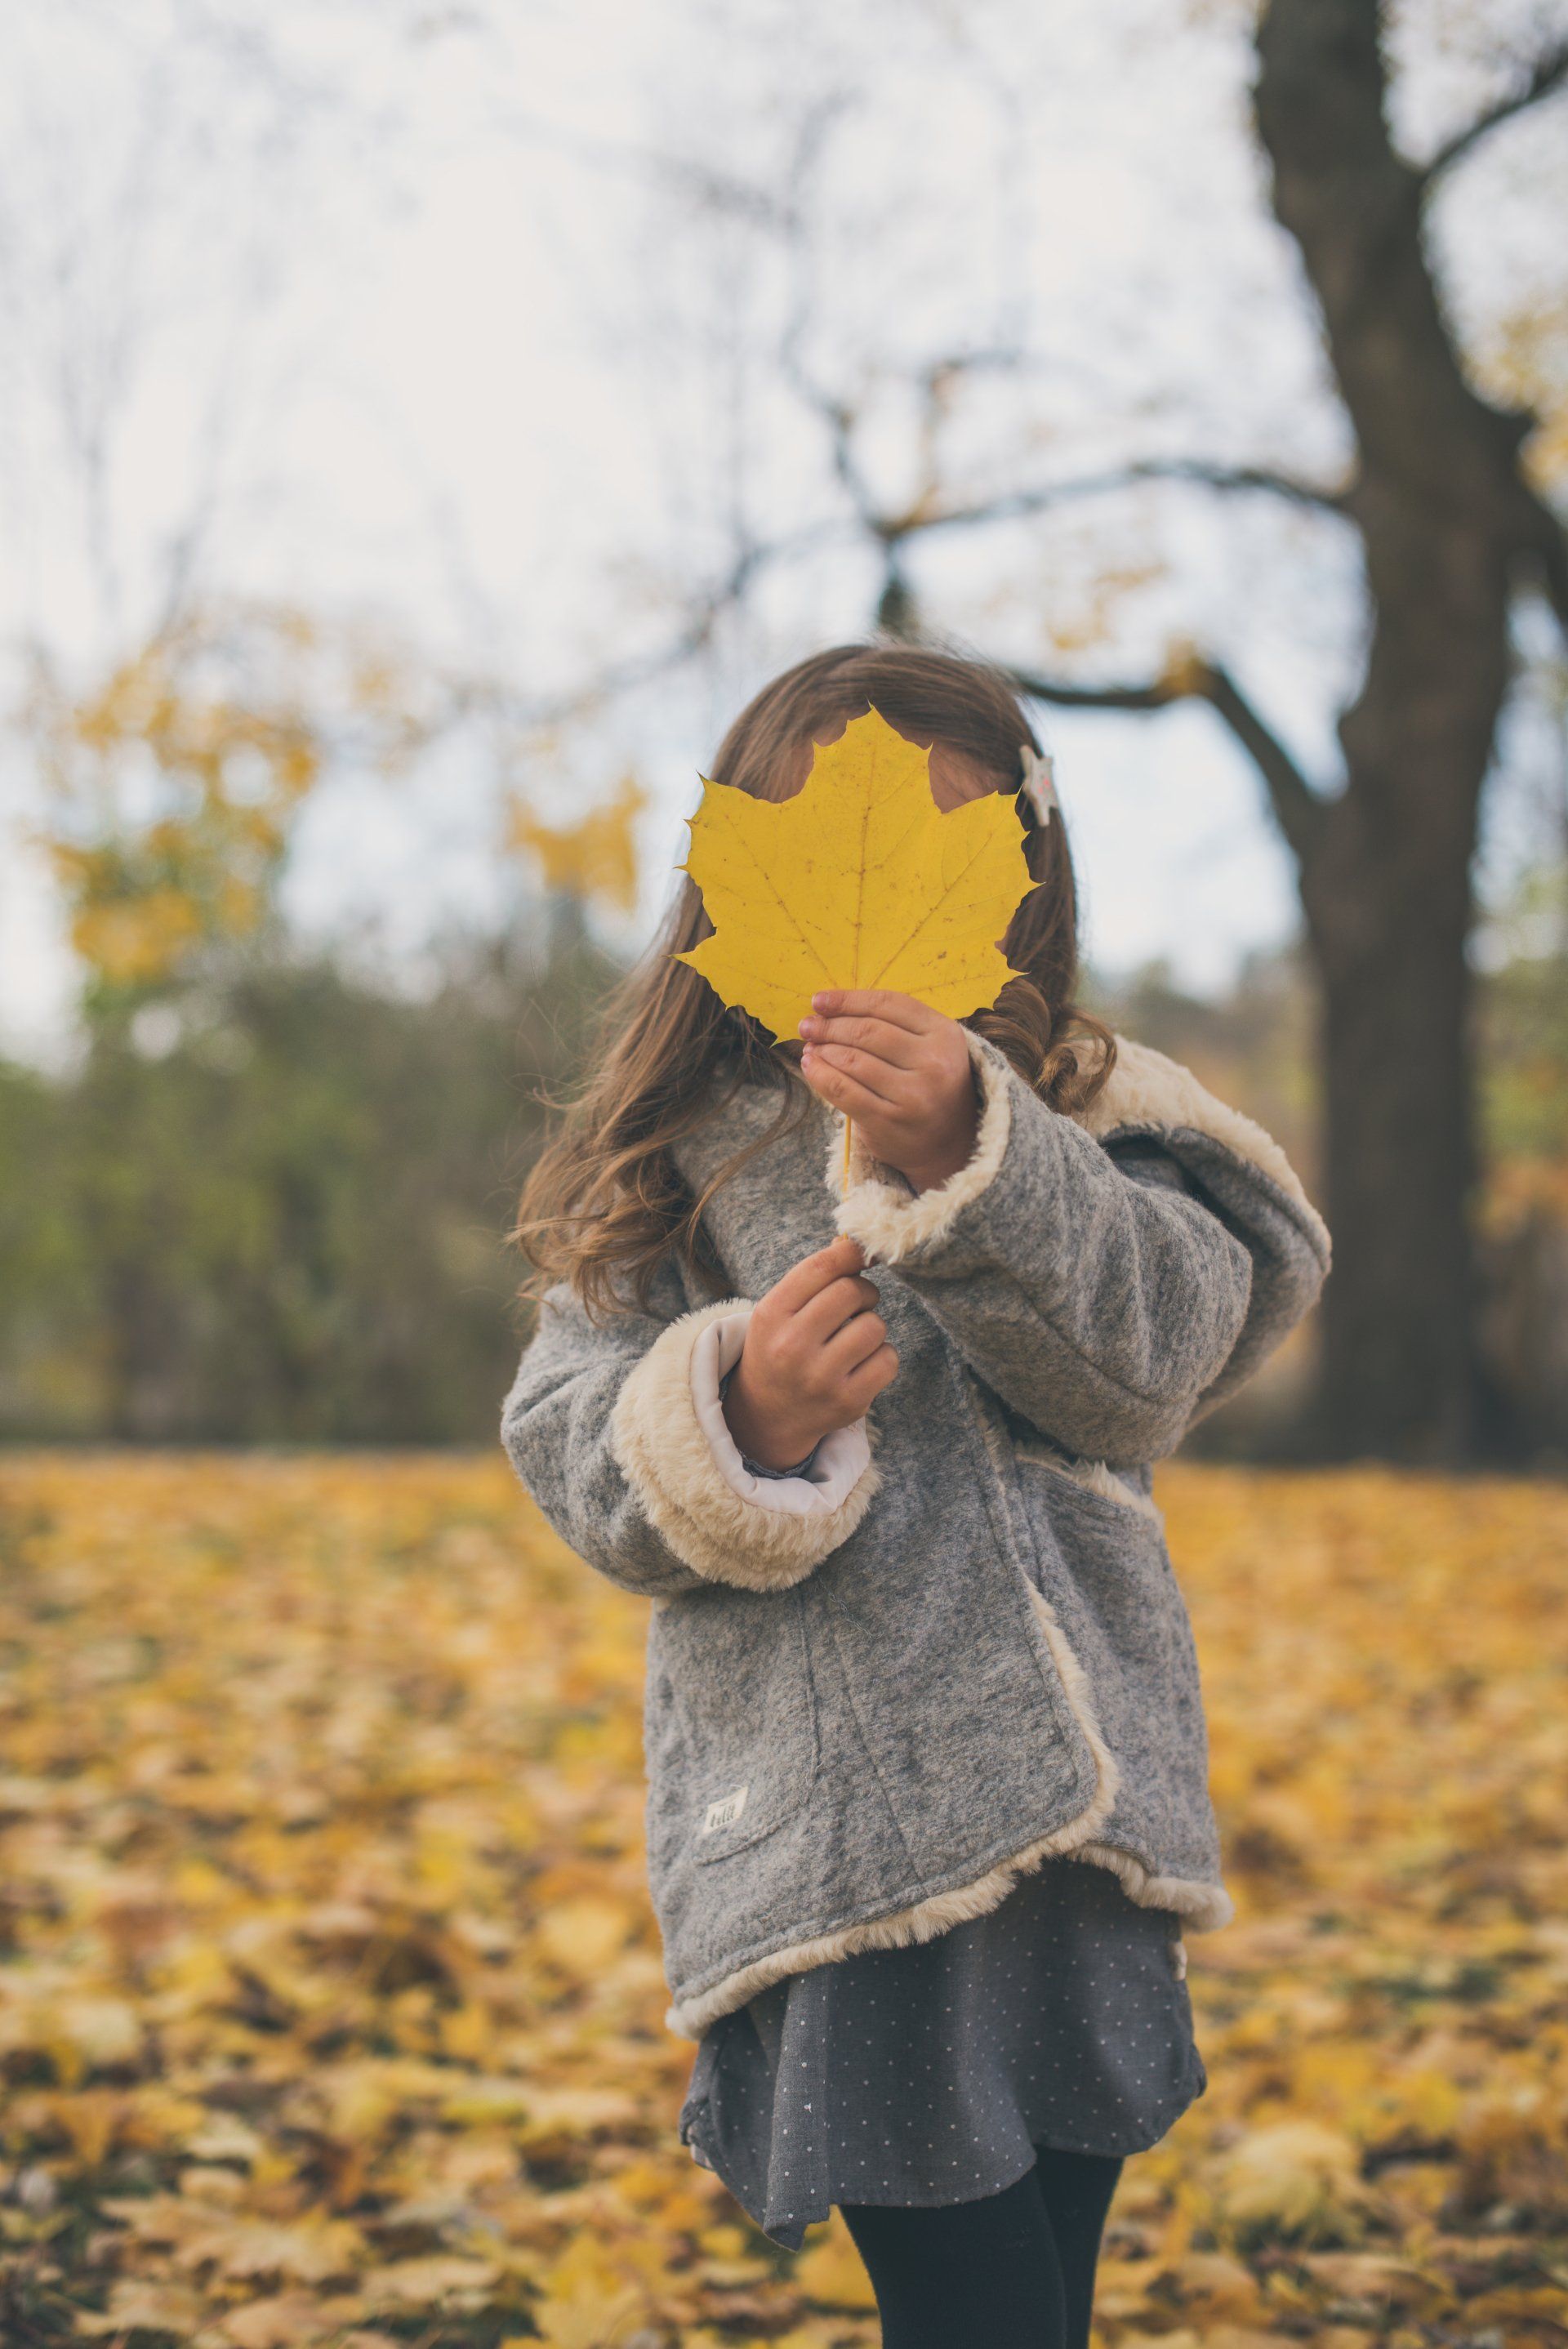 Photo of a young girl holding up a large leaf in front of her face while standing in a leaf covered field